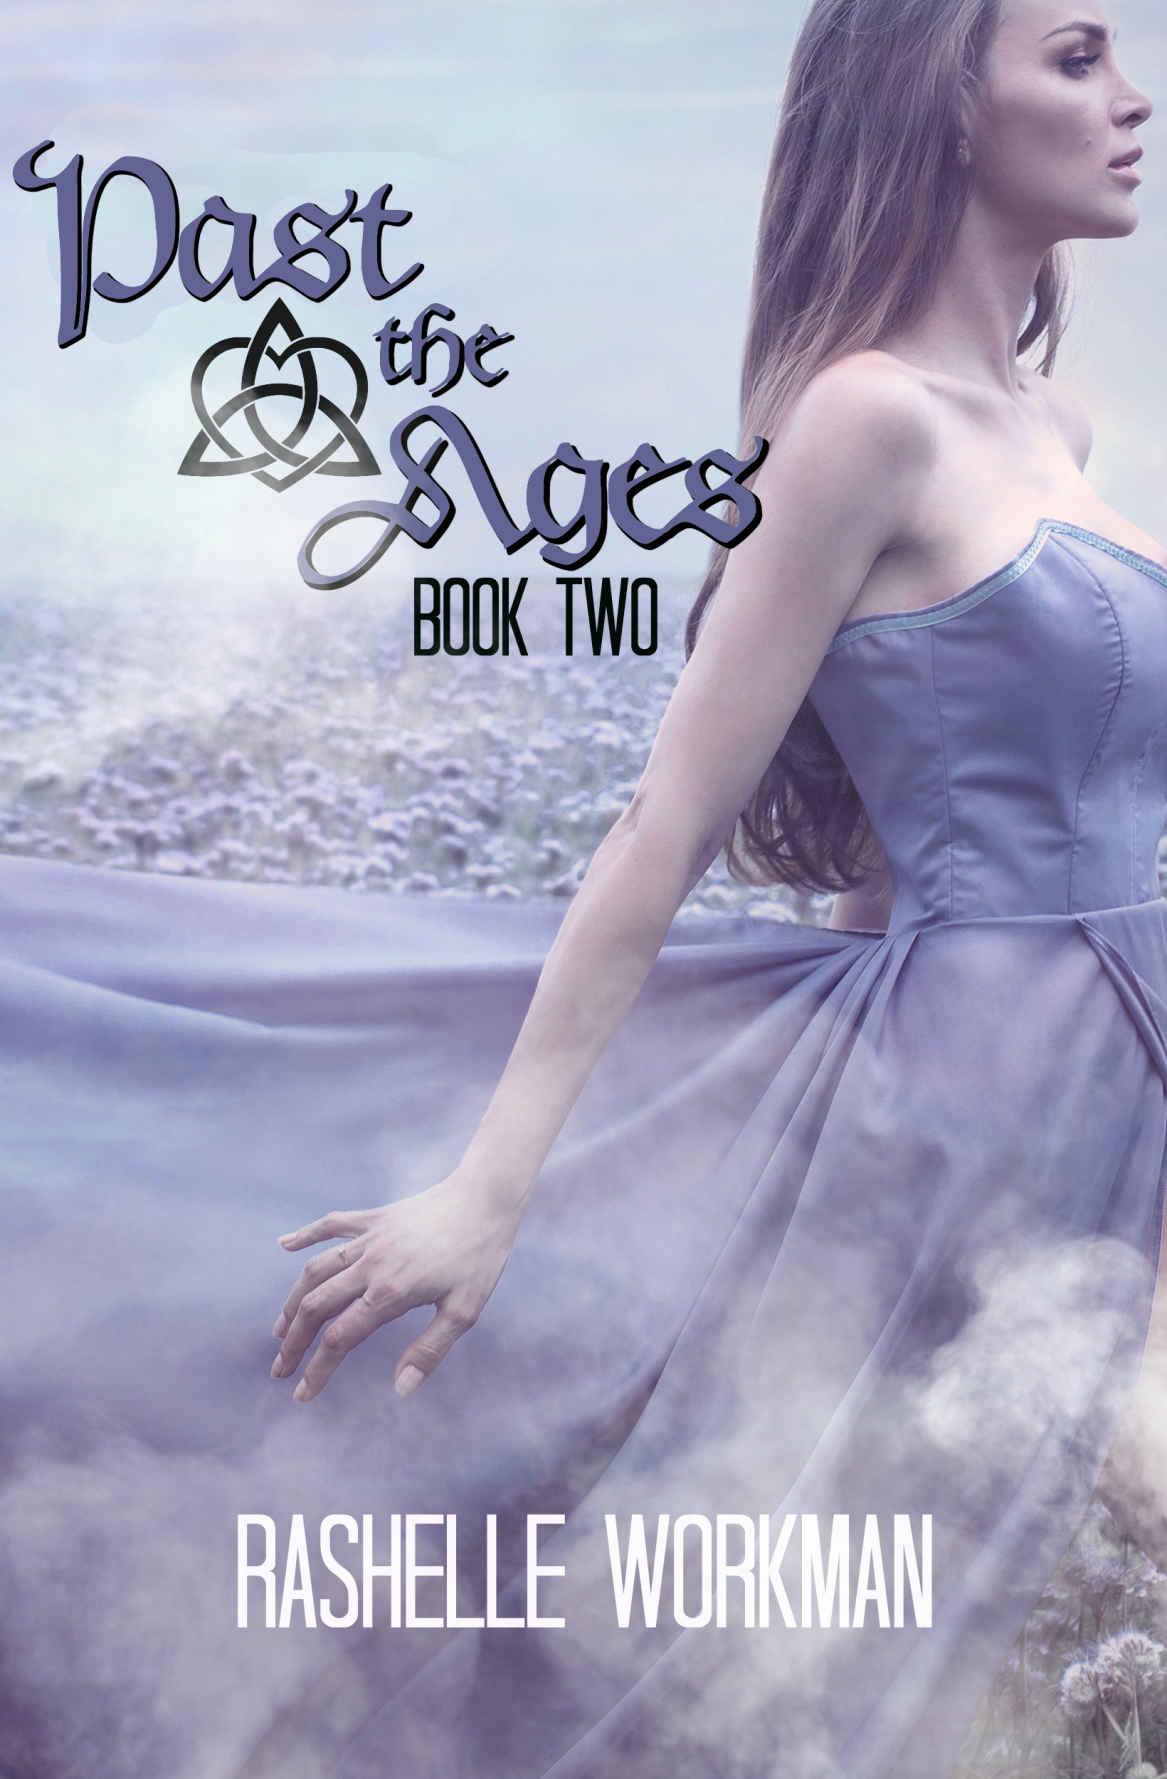 Past the Ages: Book Two by RaShelle Workman